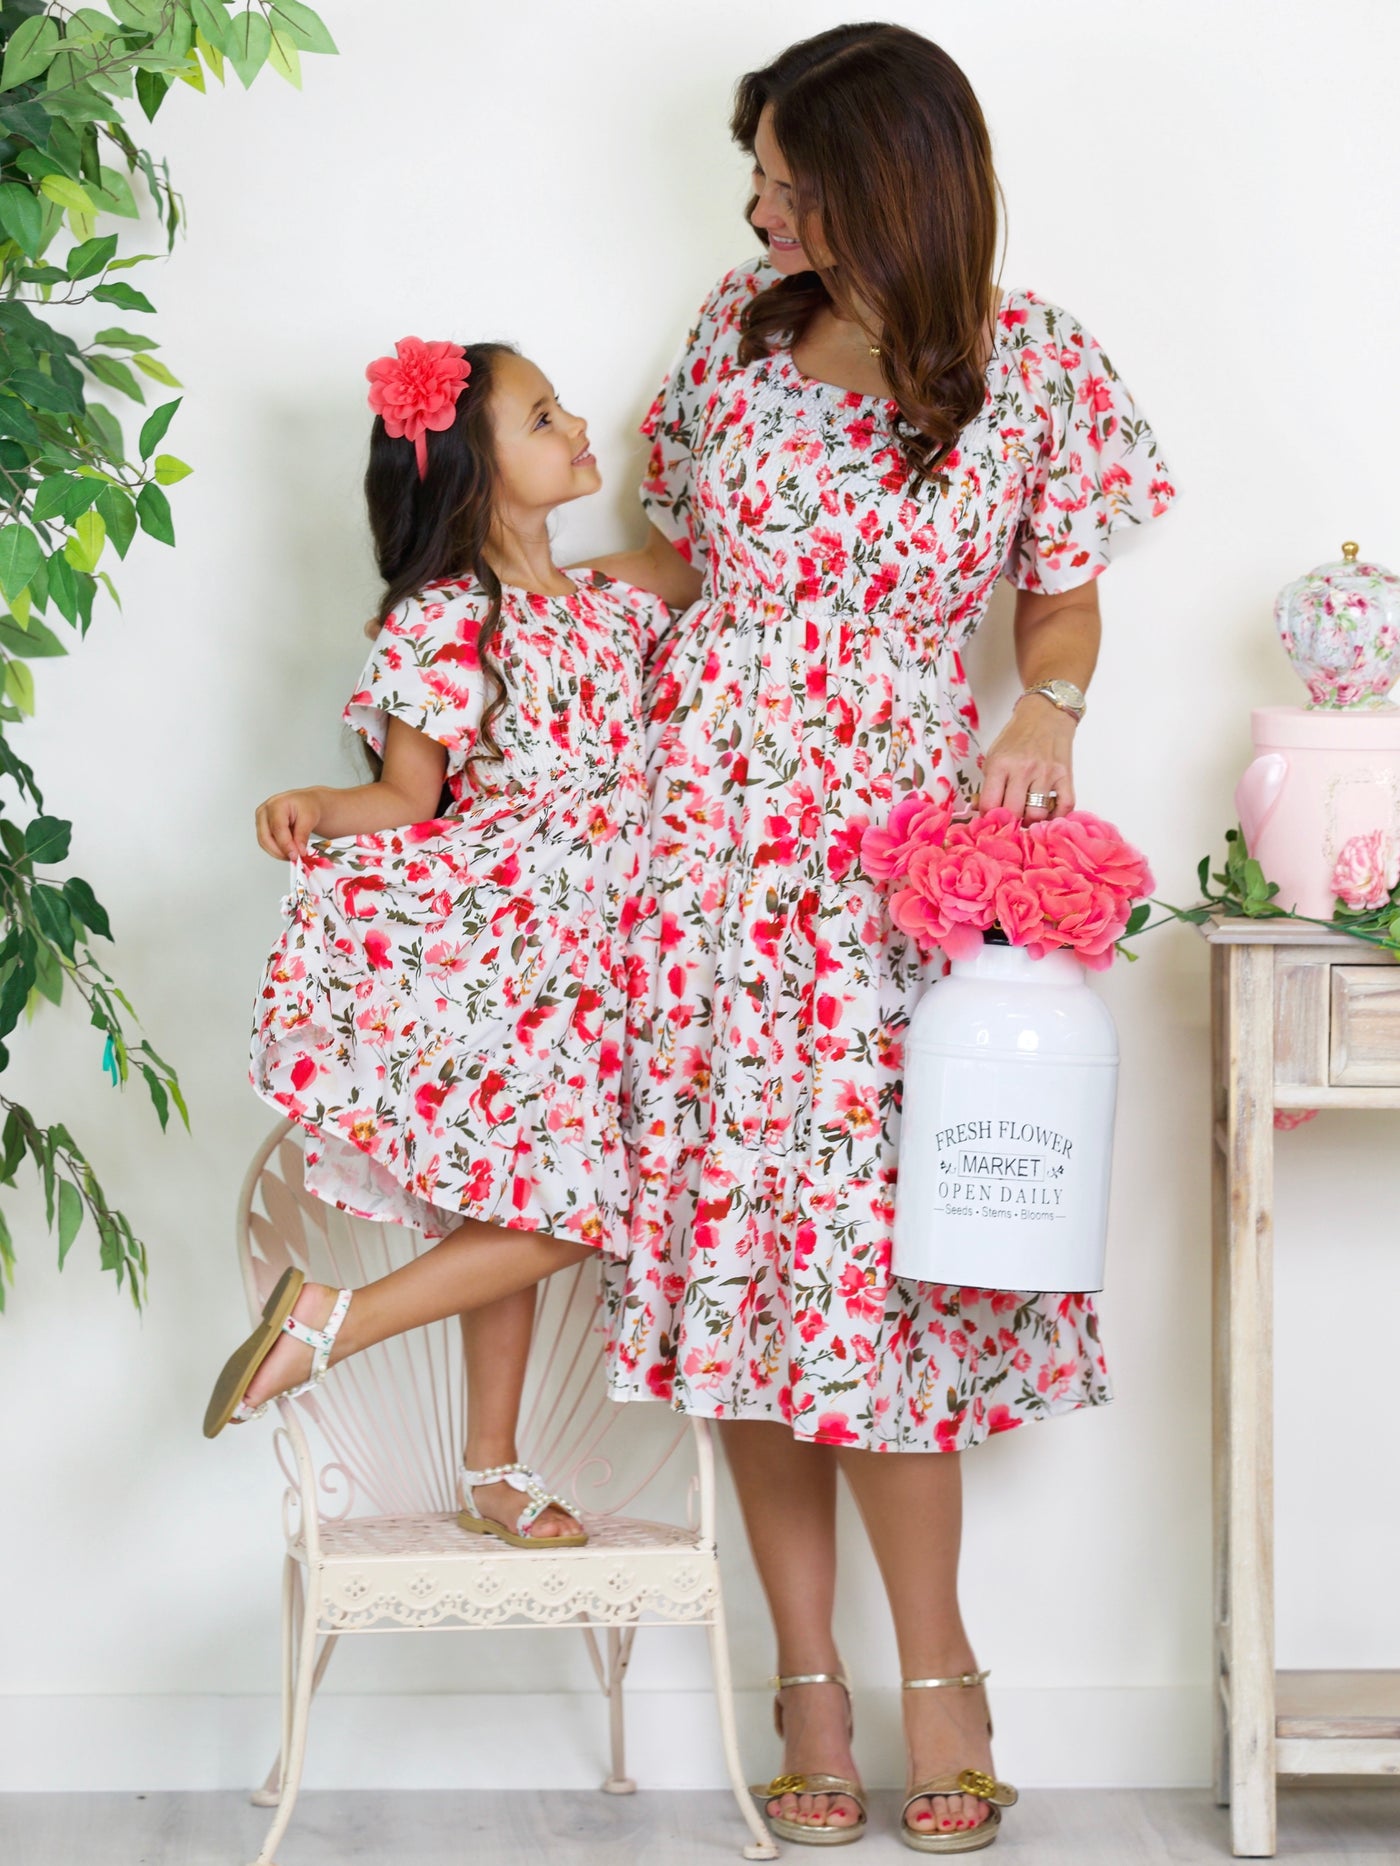 Mia Belle Girls Red Floral Smocked Dress | Mommy And Me Dresses